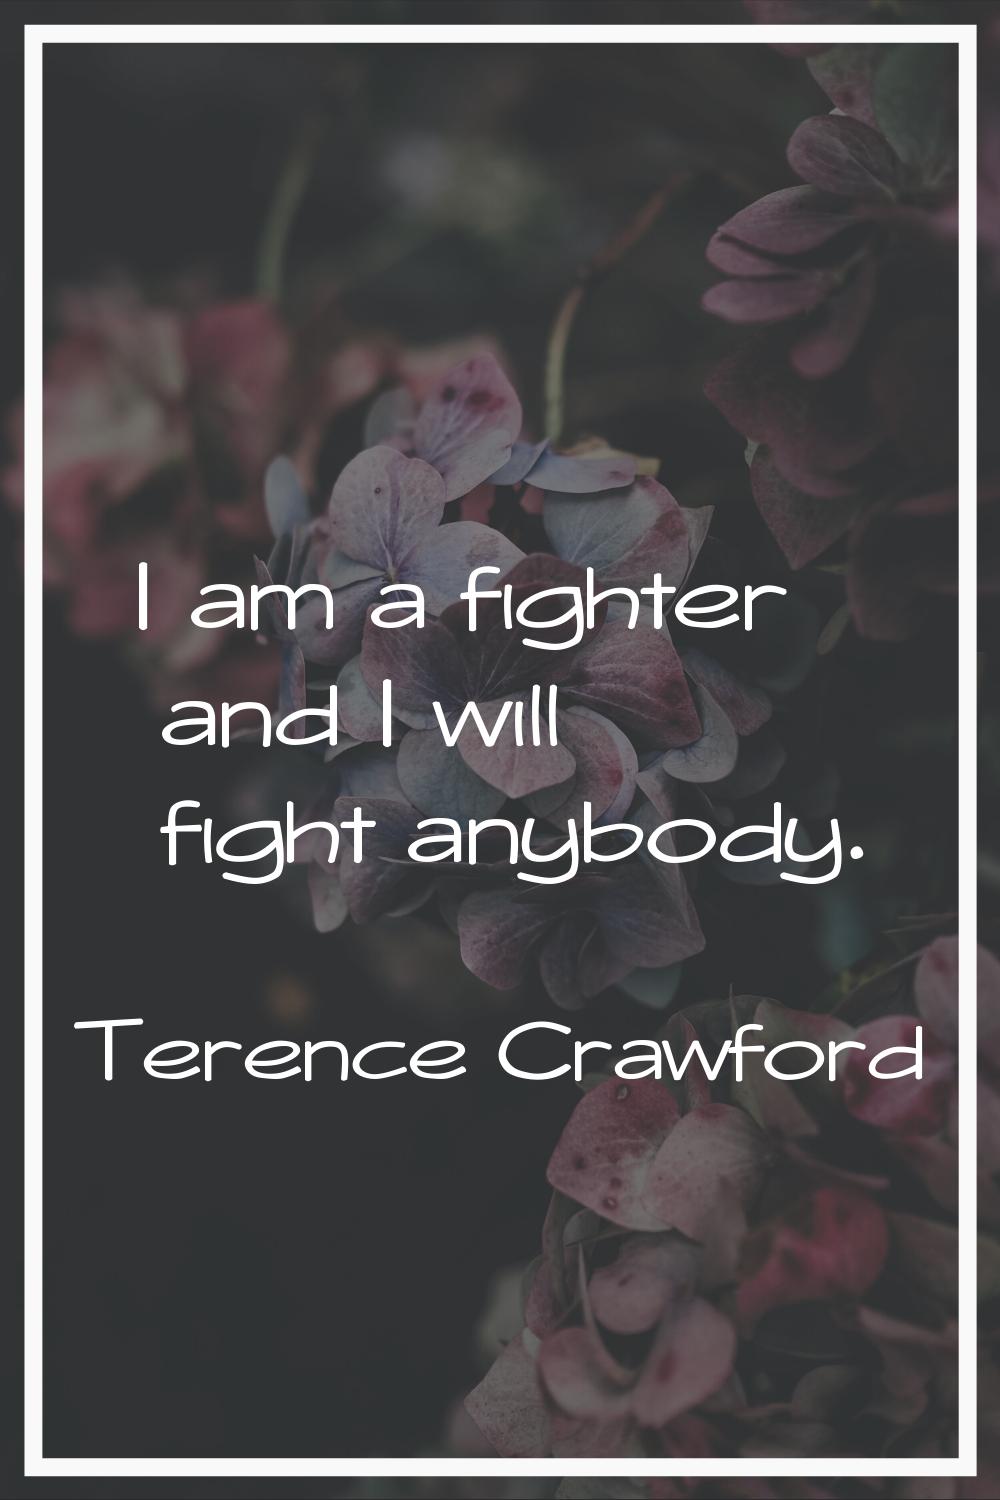 I am a fighter and I will fight anybody.